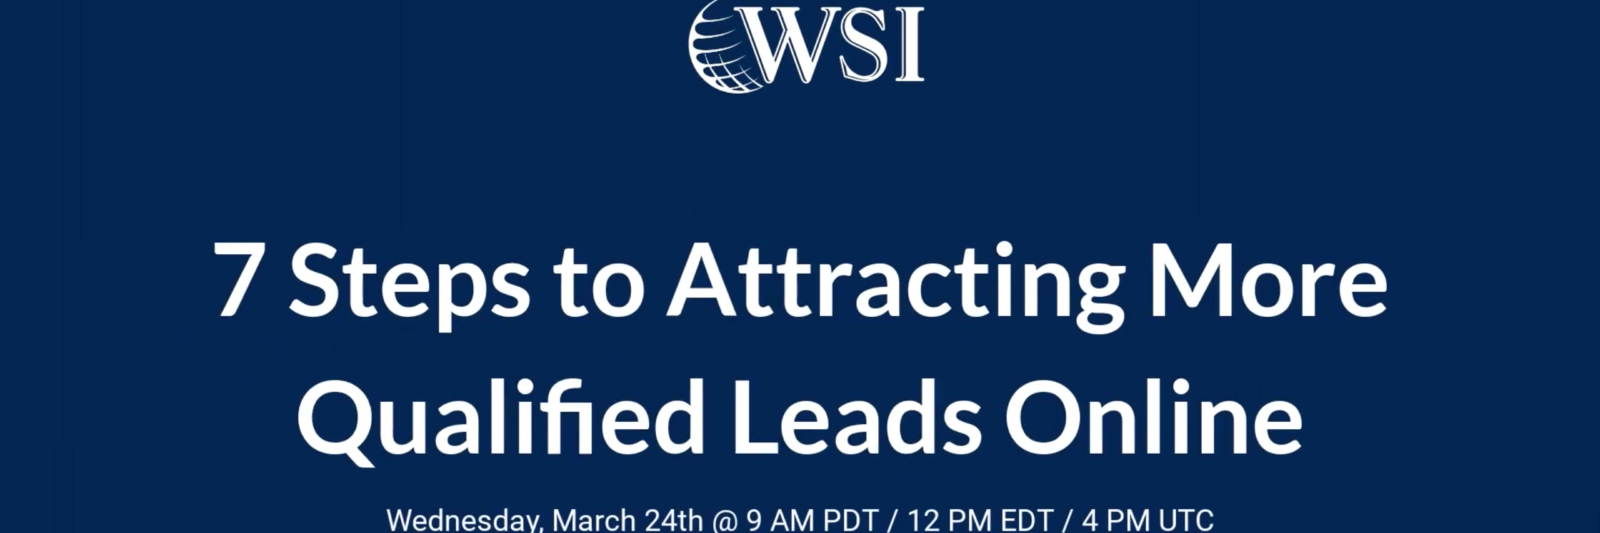 7 Steps to Attracting More Qualified Leads Online